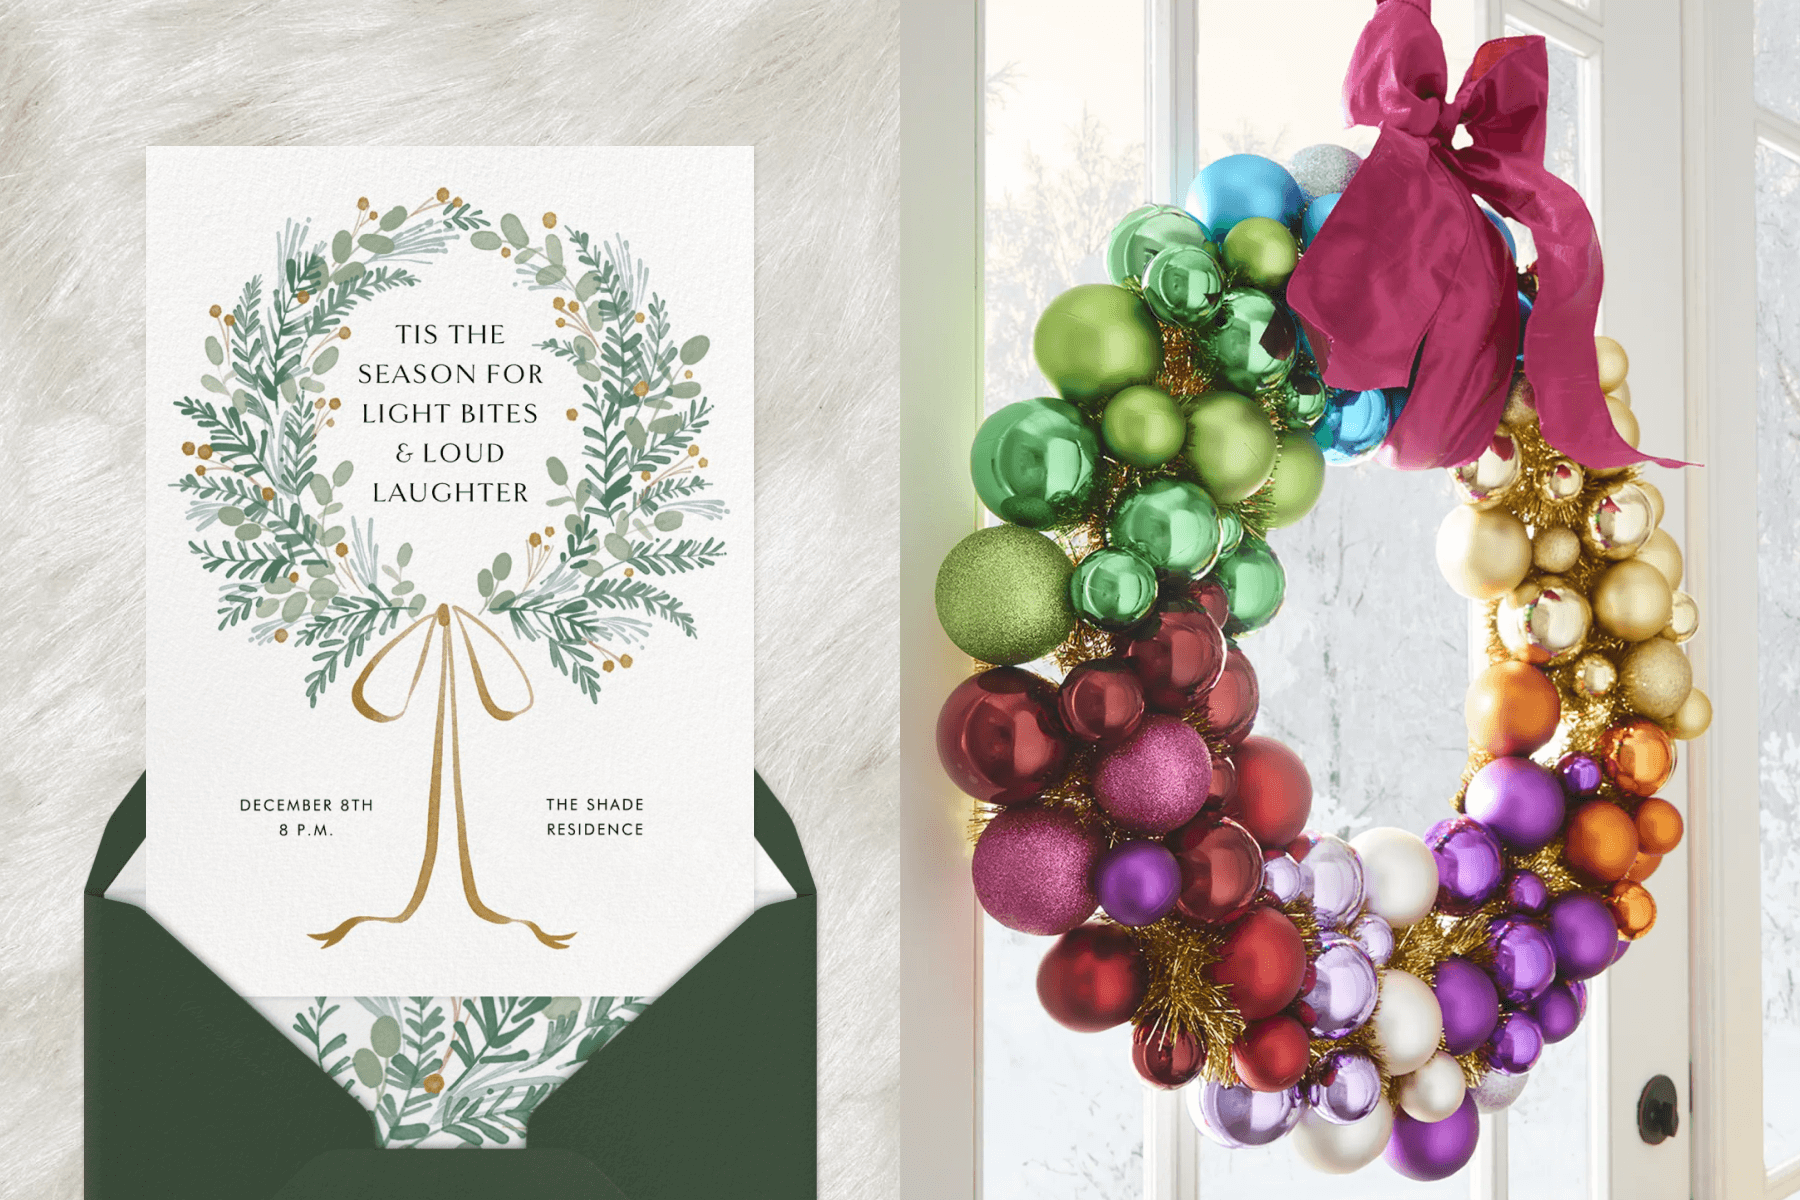 An invitation with a delicate wreath and draped gold bow; a colorful wreath made of rainbow ball ornaments.